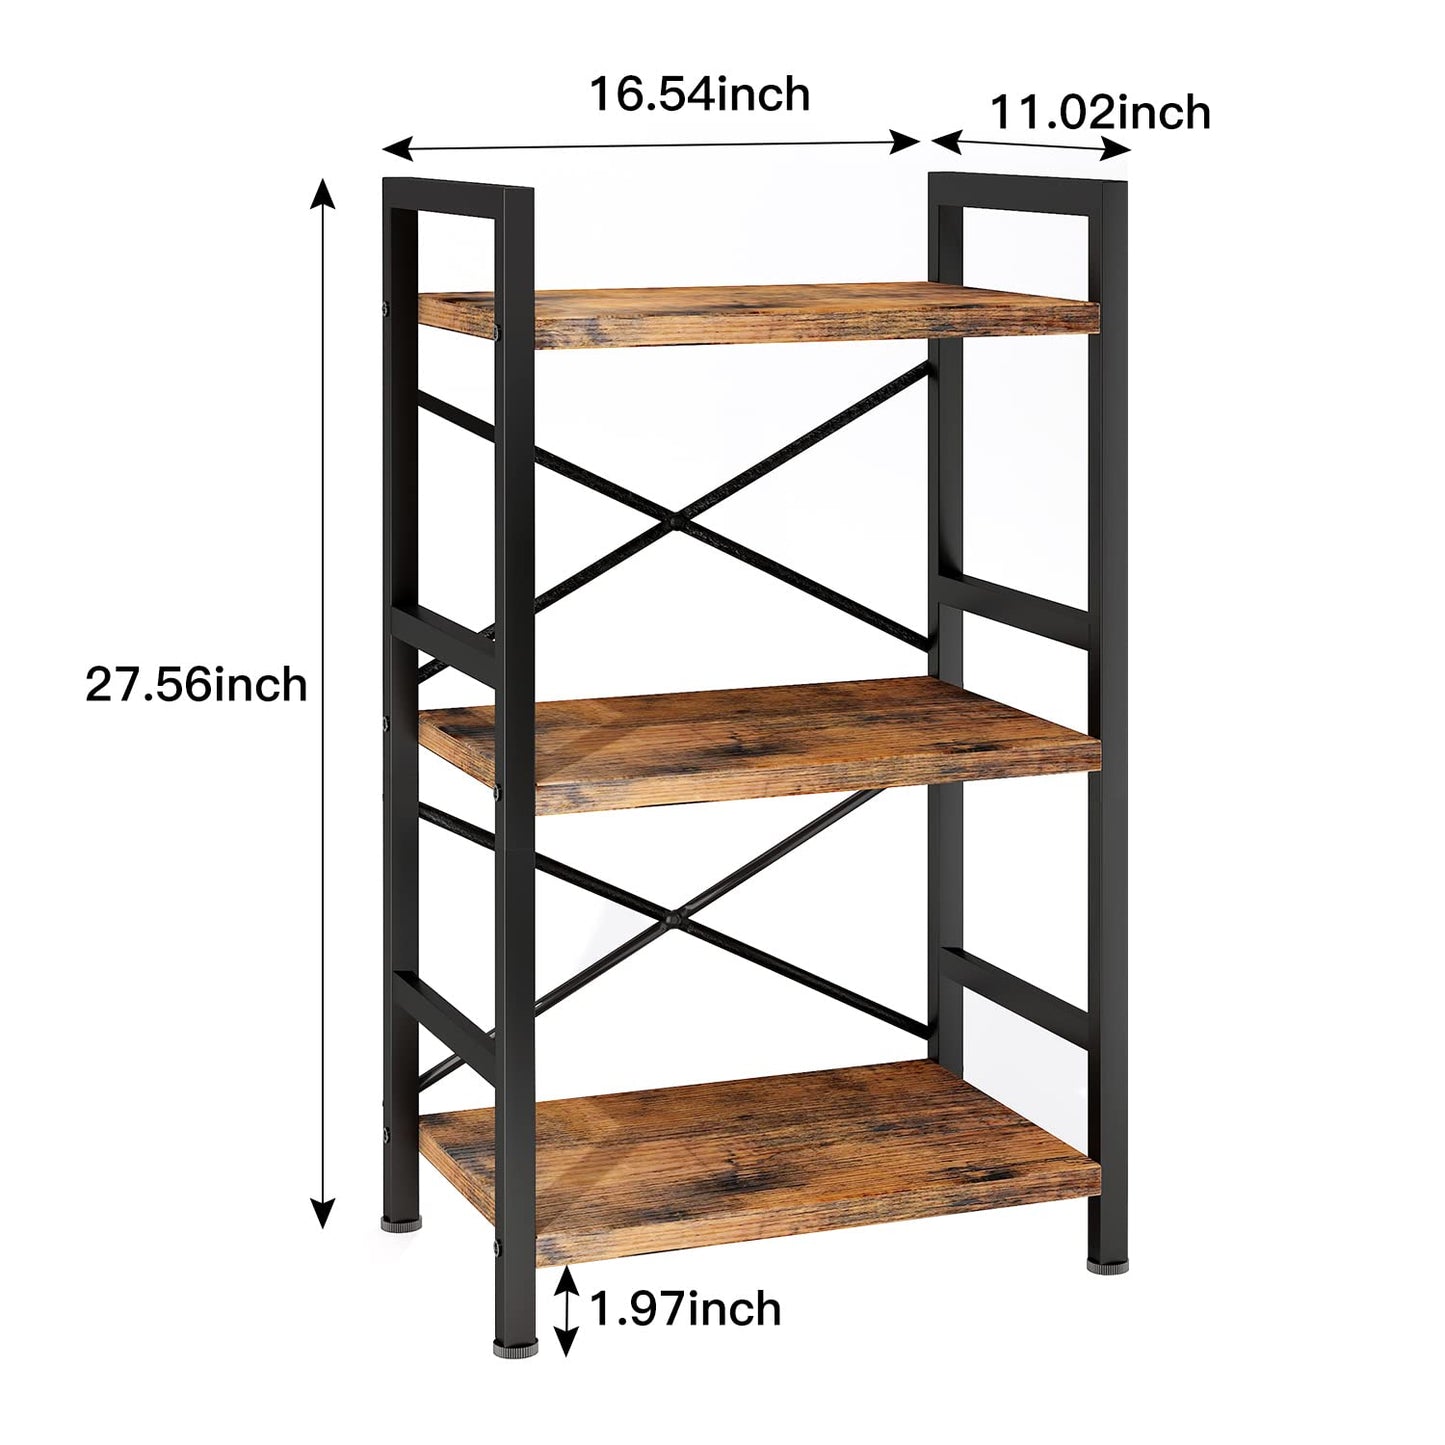 Homeiju Bookshelf, 3 Tier Industrial Bookcase, Metal Small Bookcase, Rustic Etagere Book Shelf Storage Organizer for Living Room, Bedroom, and Home Office(Rustic Brown) Patent Pending D29873033